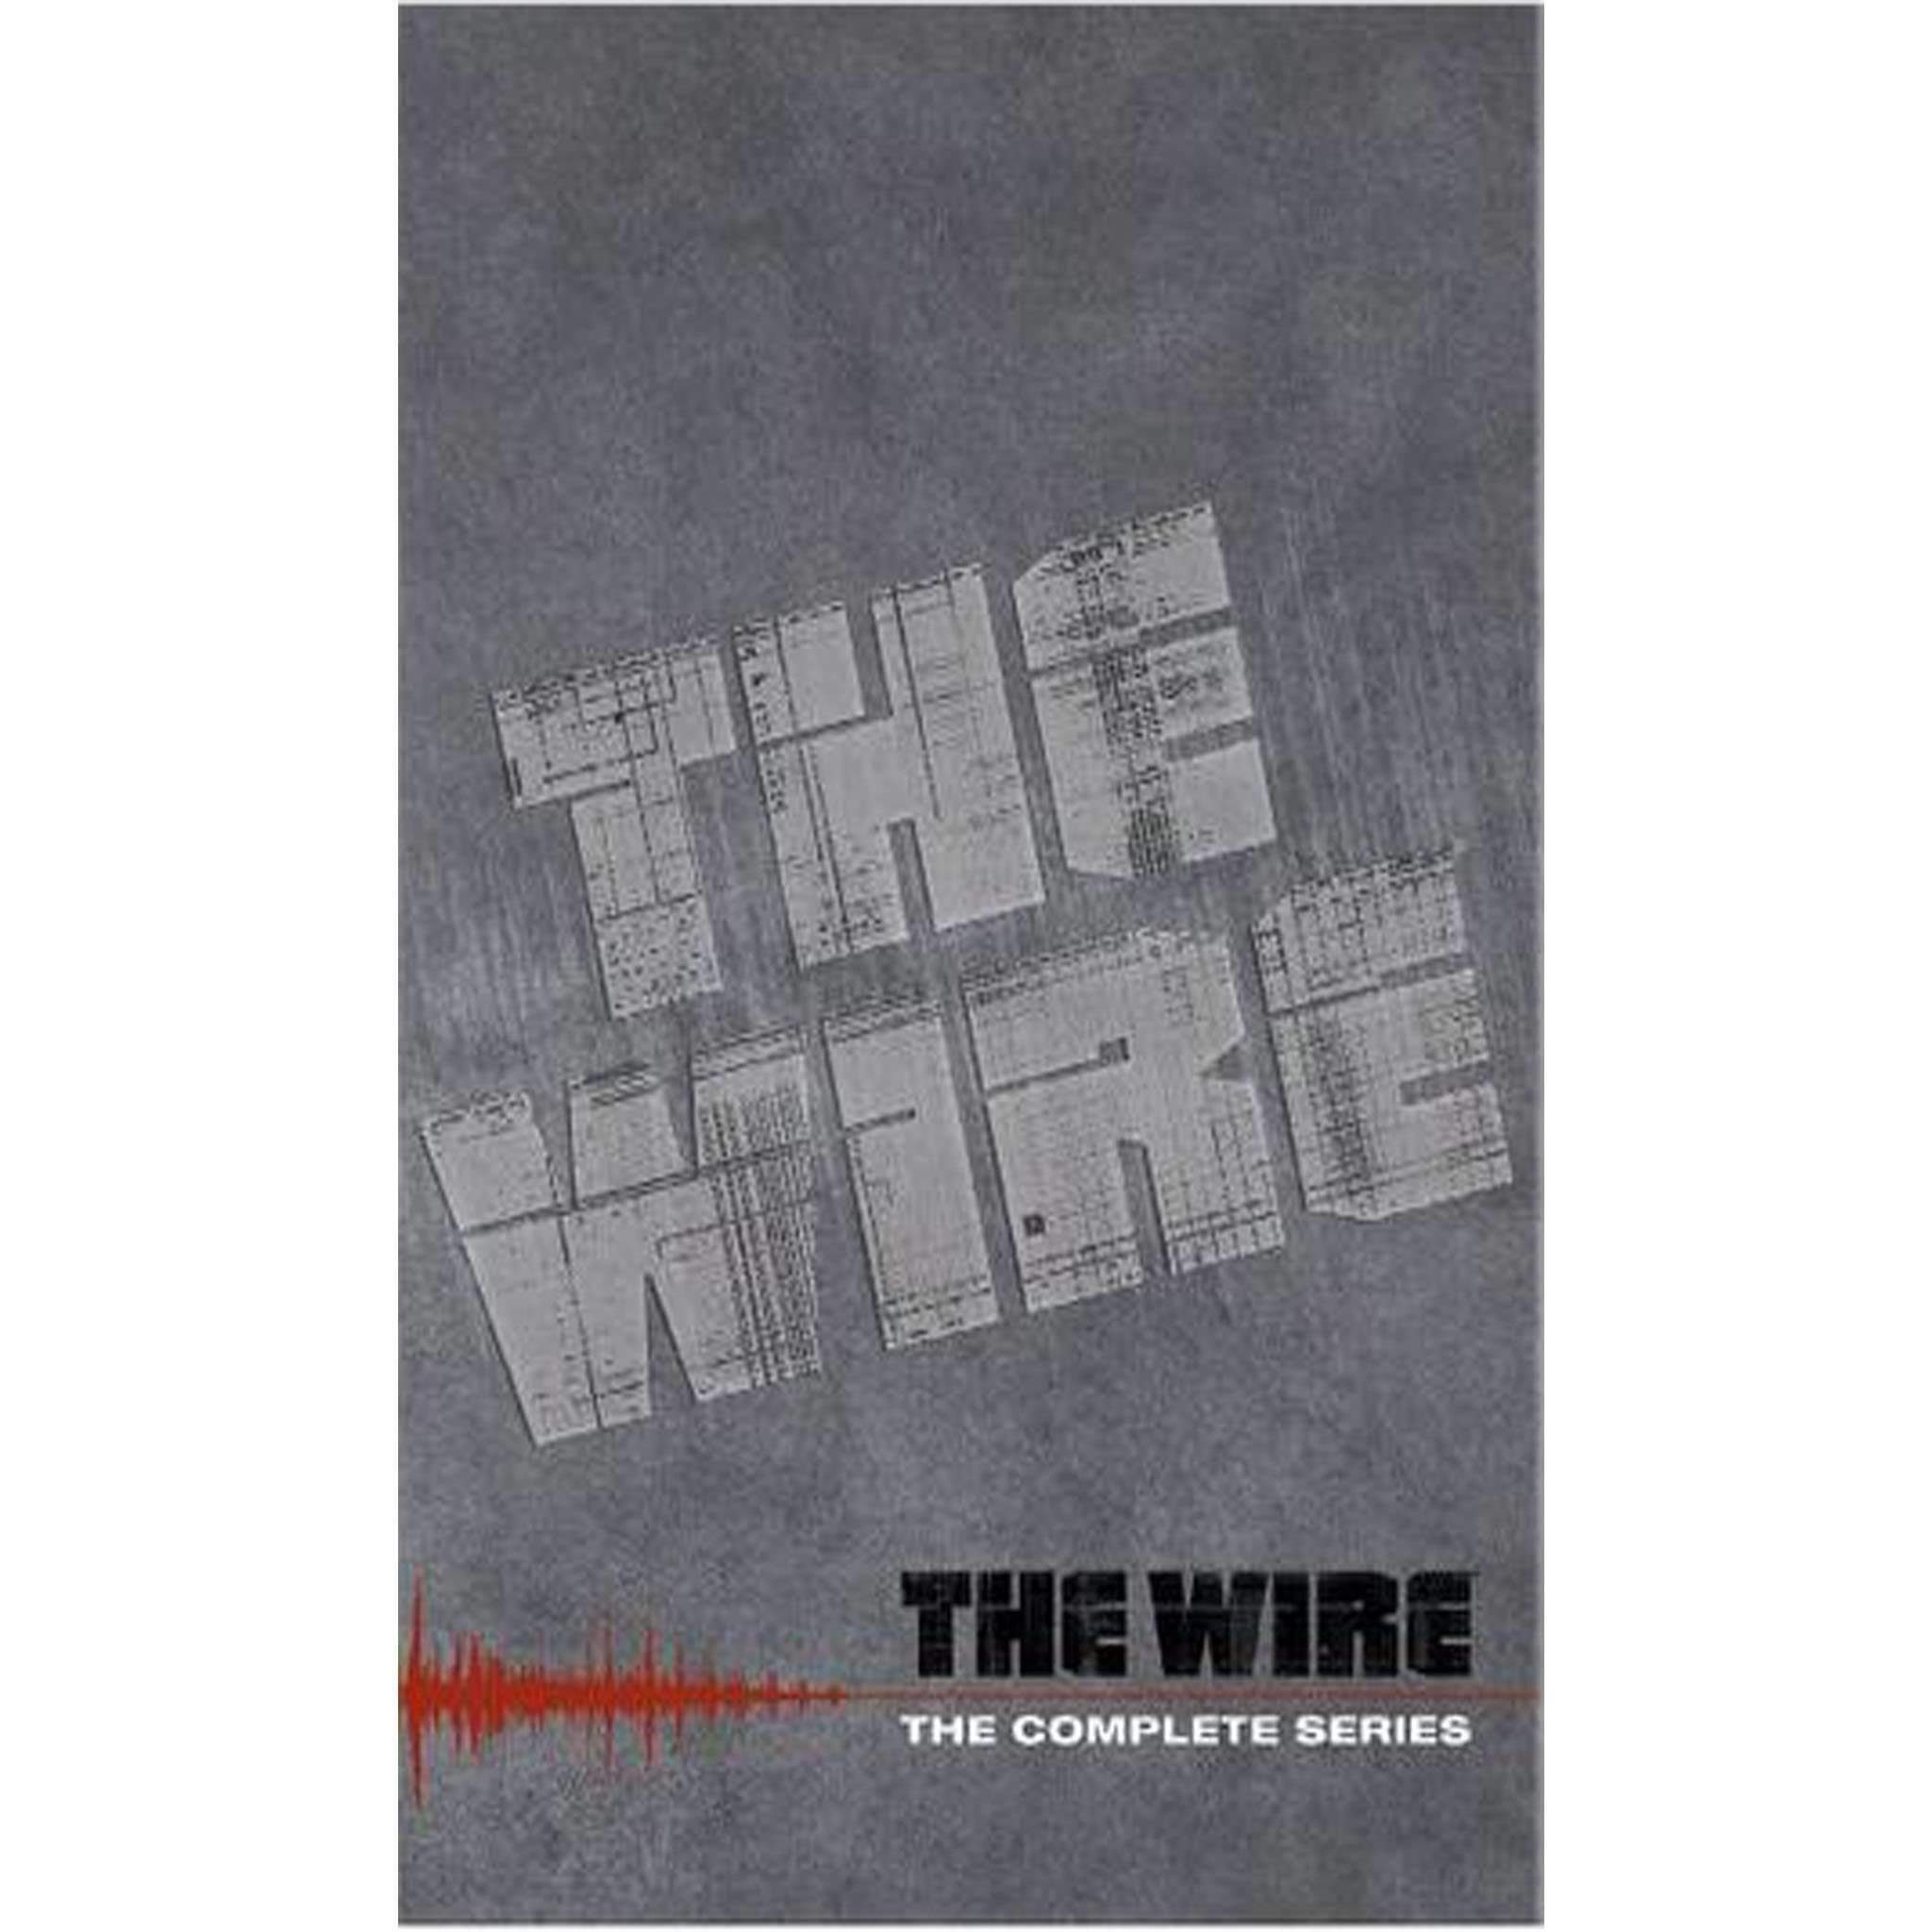 The Wire: The Complete Series (DVD) HBO DVDs & Blu-ray Discs > DVDs > Box Sets